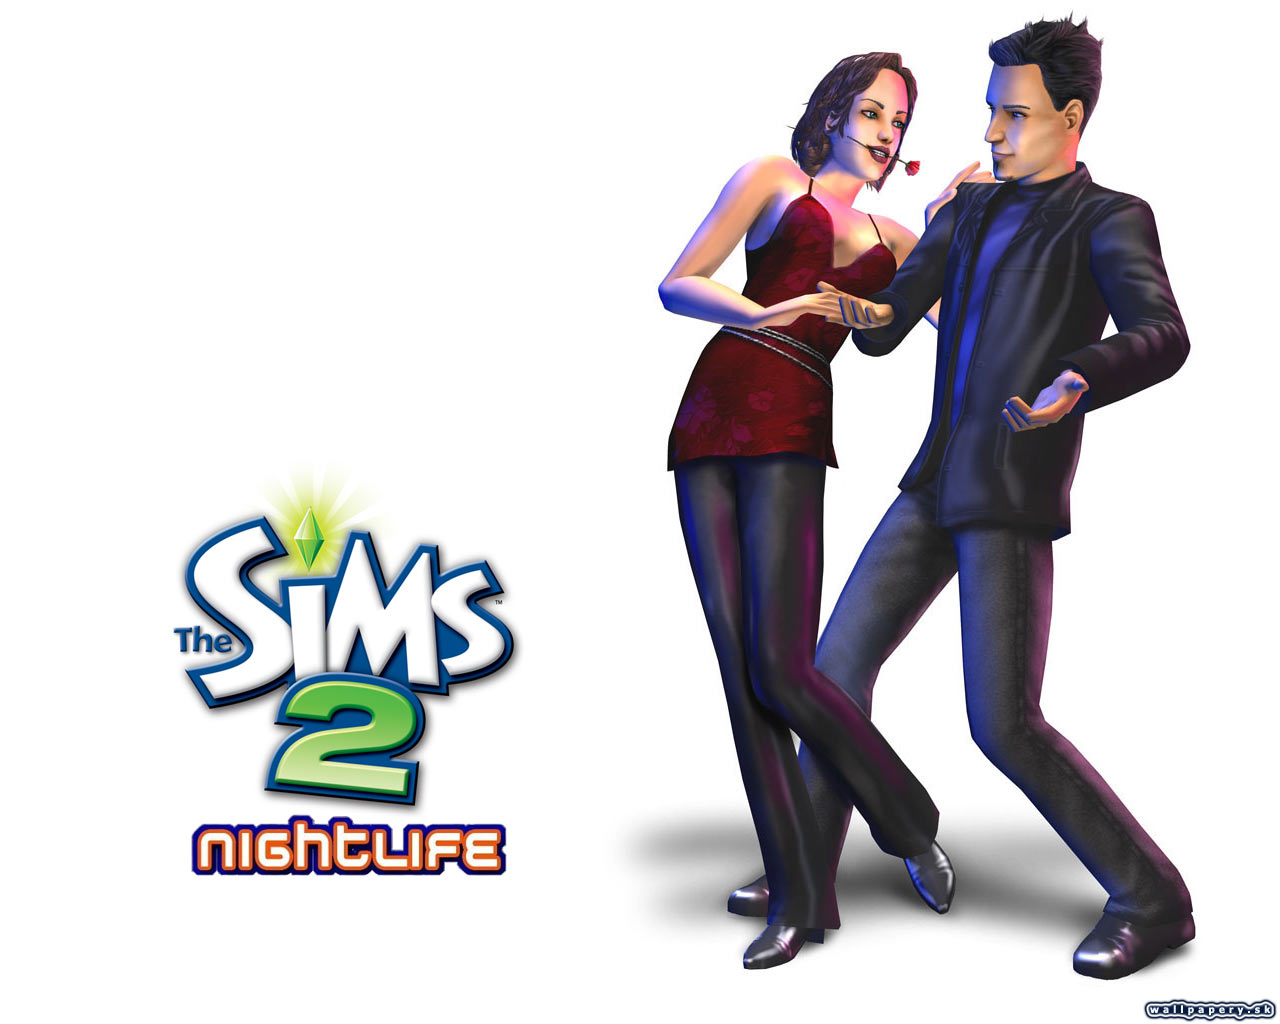 The Sims 2: Nightlife - wallpaper 3